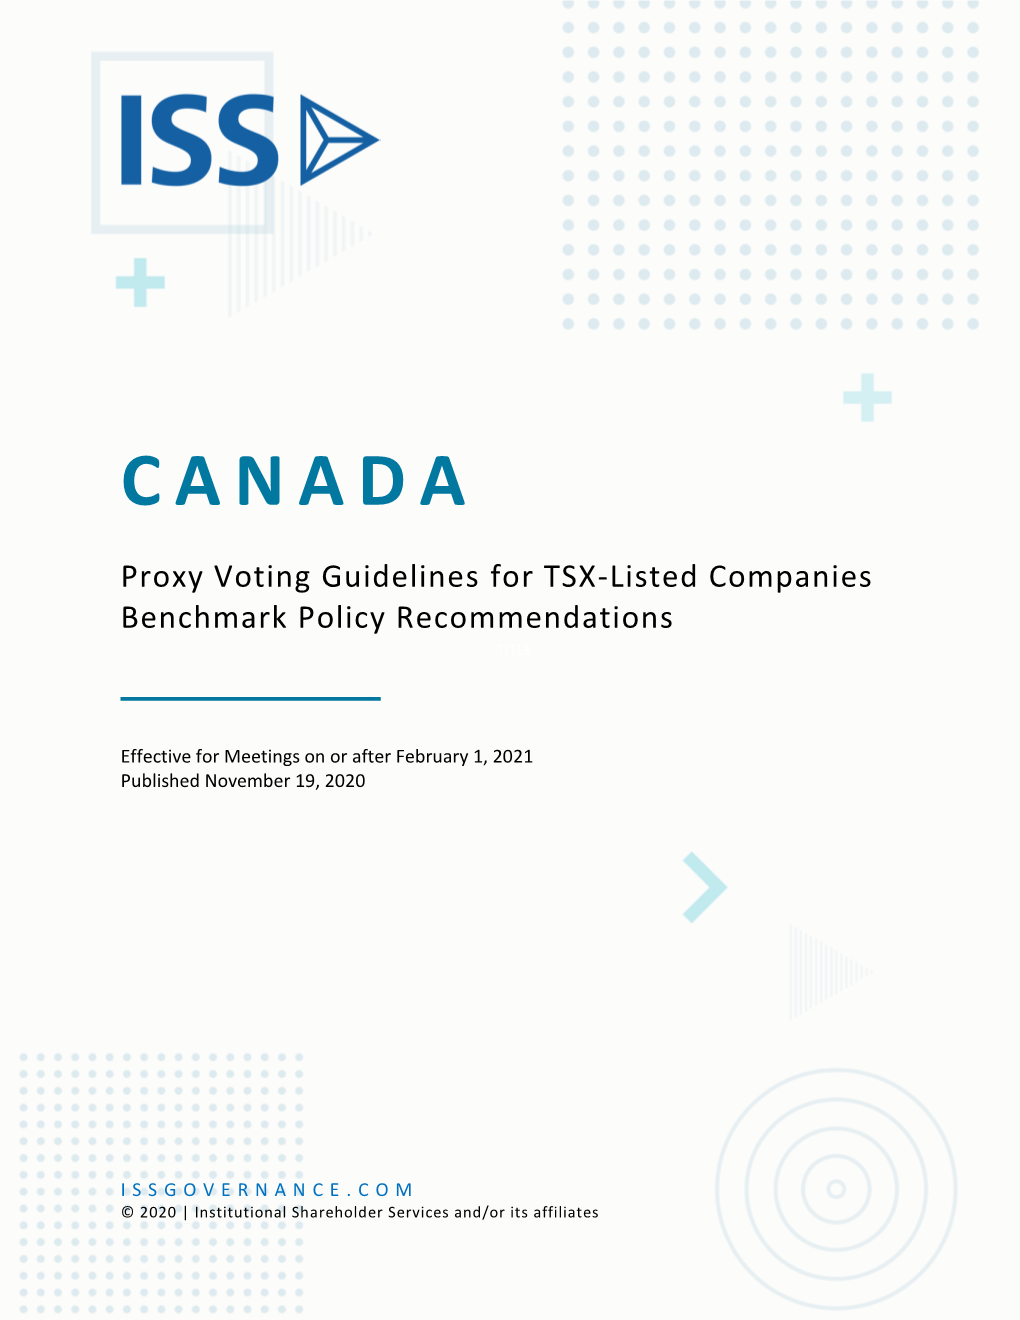 Canada Proxy Voting Guidelines for TSX-Listed Companies